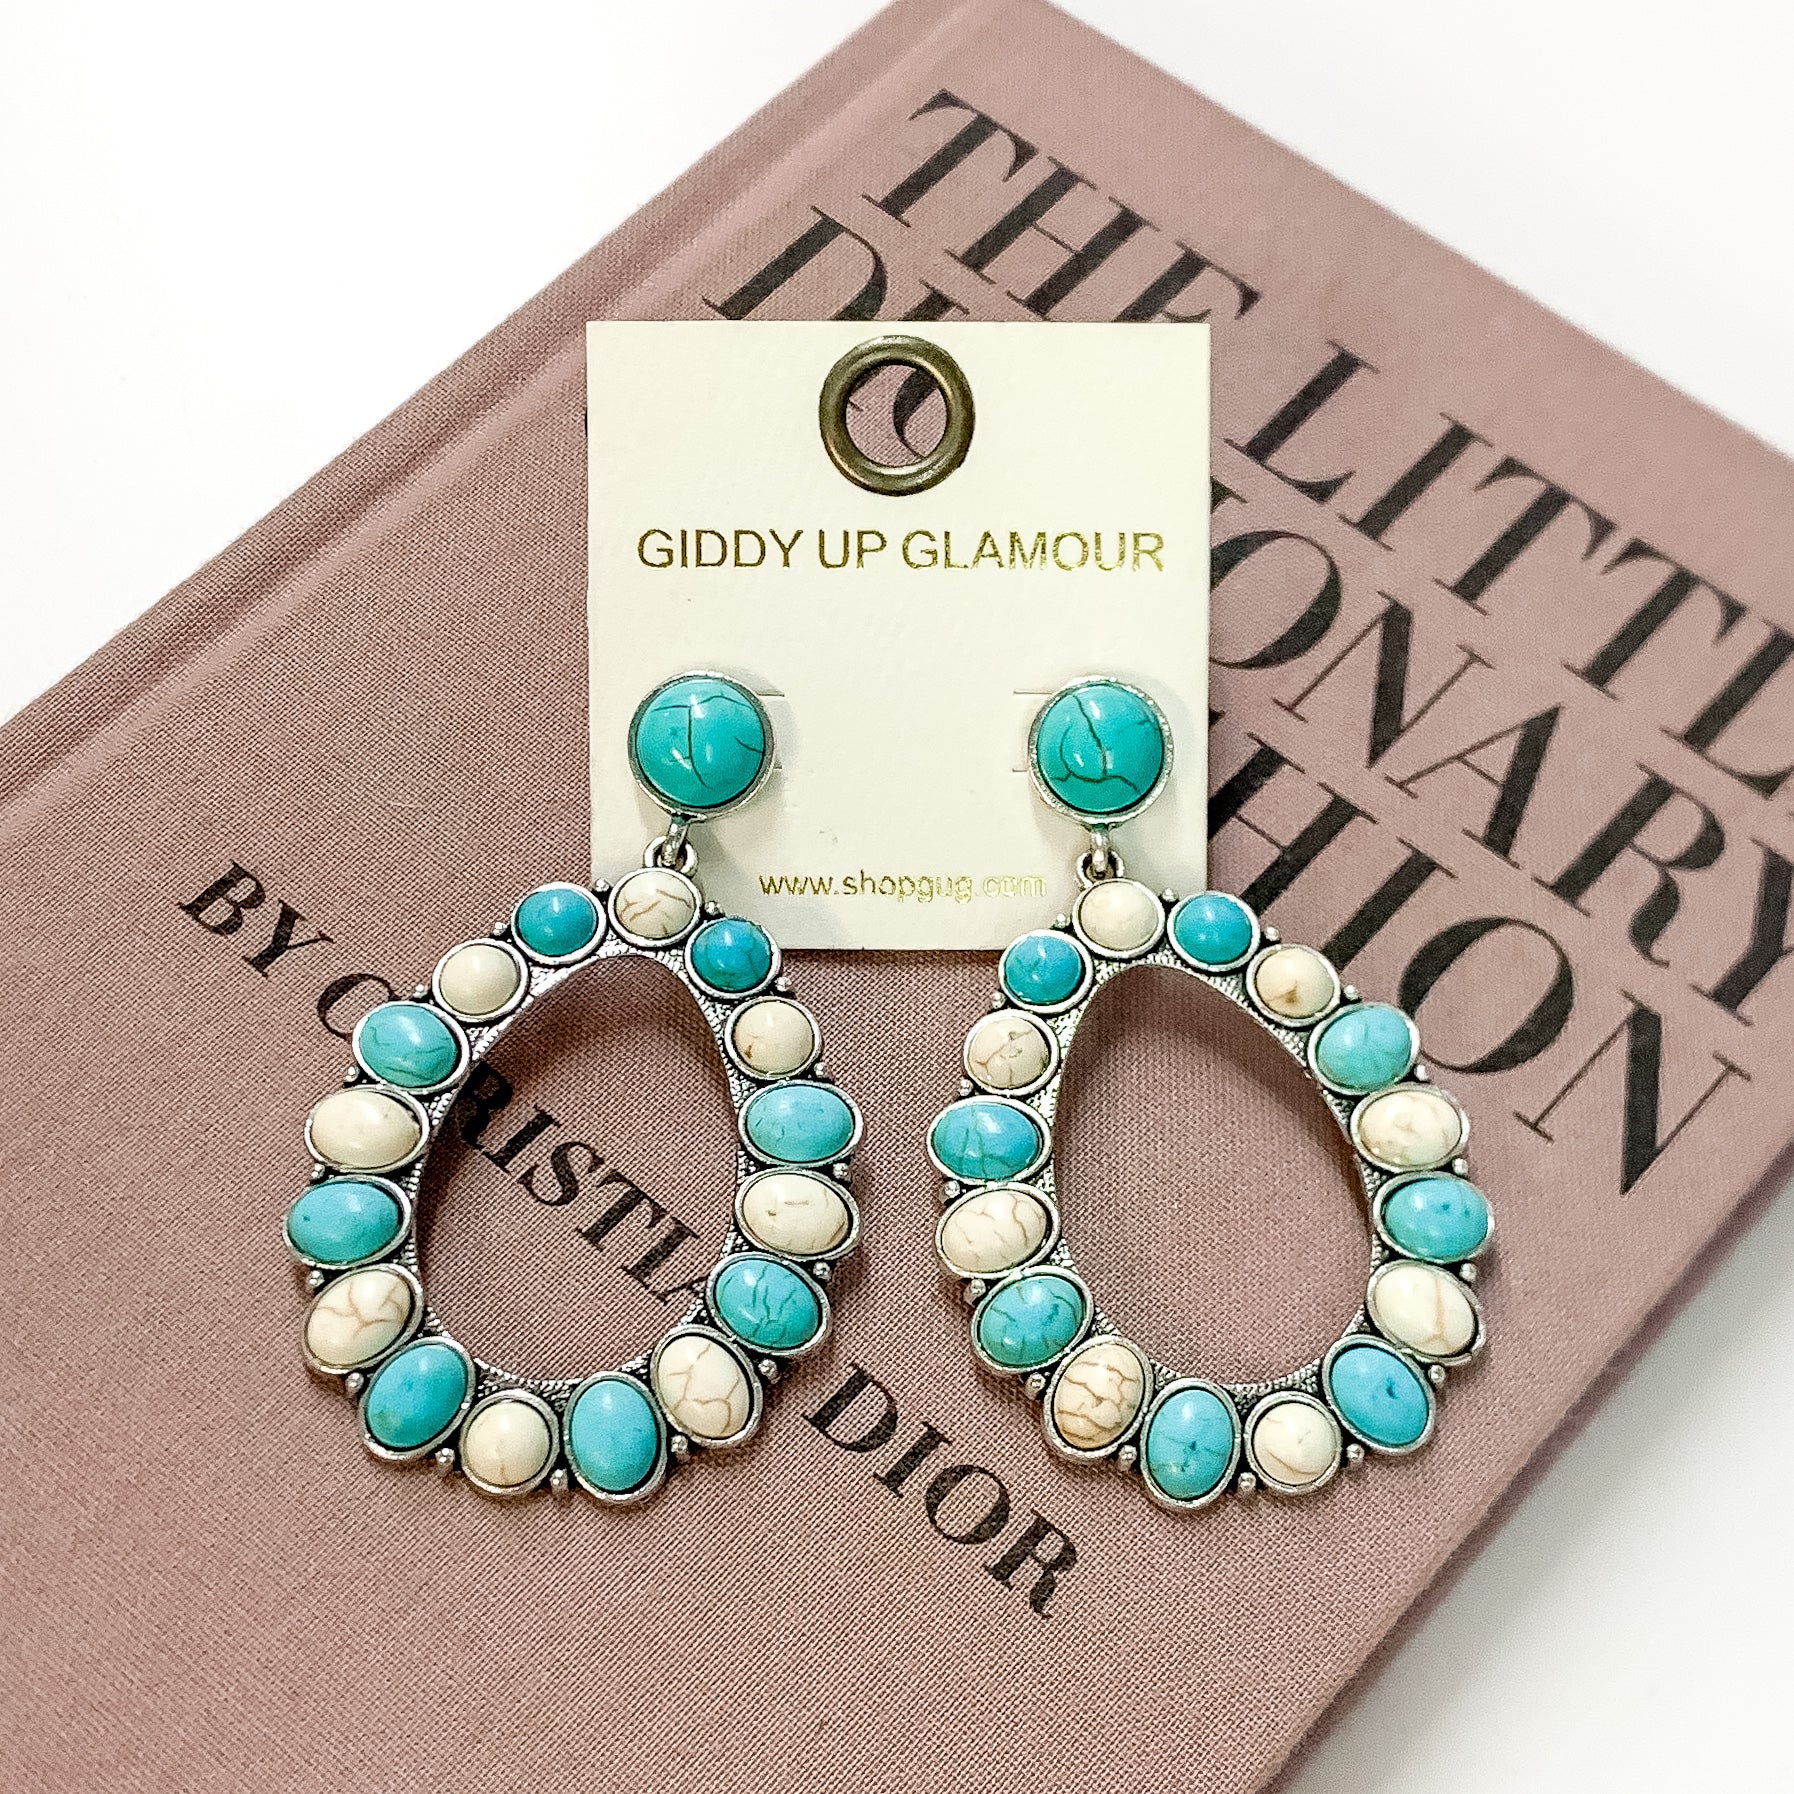 Circle Post Earrings and Open Teardrop Pendant with Turquoise Blue and White Stones - Giddy Up Glamour Boutique